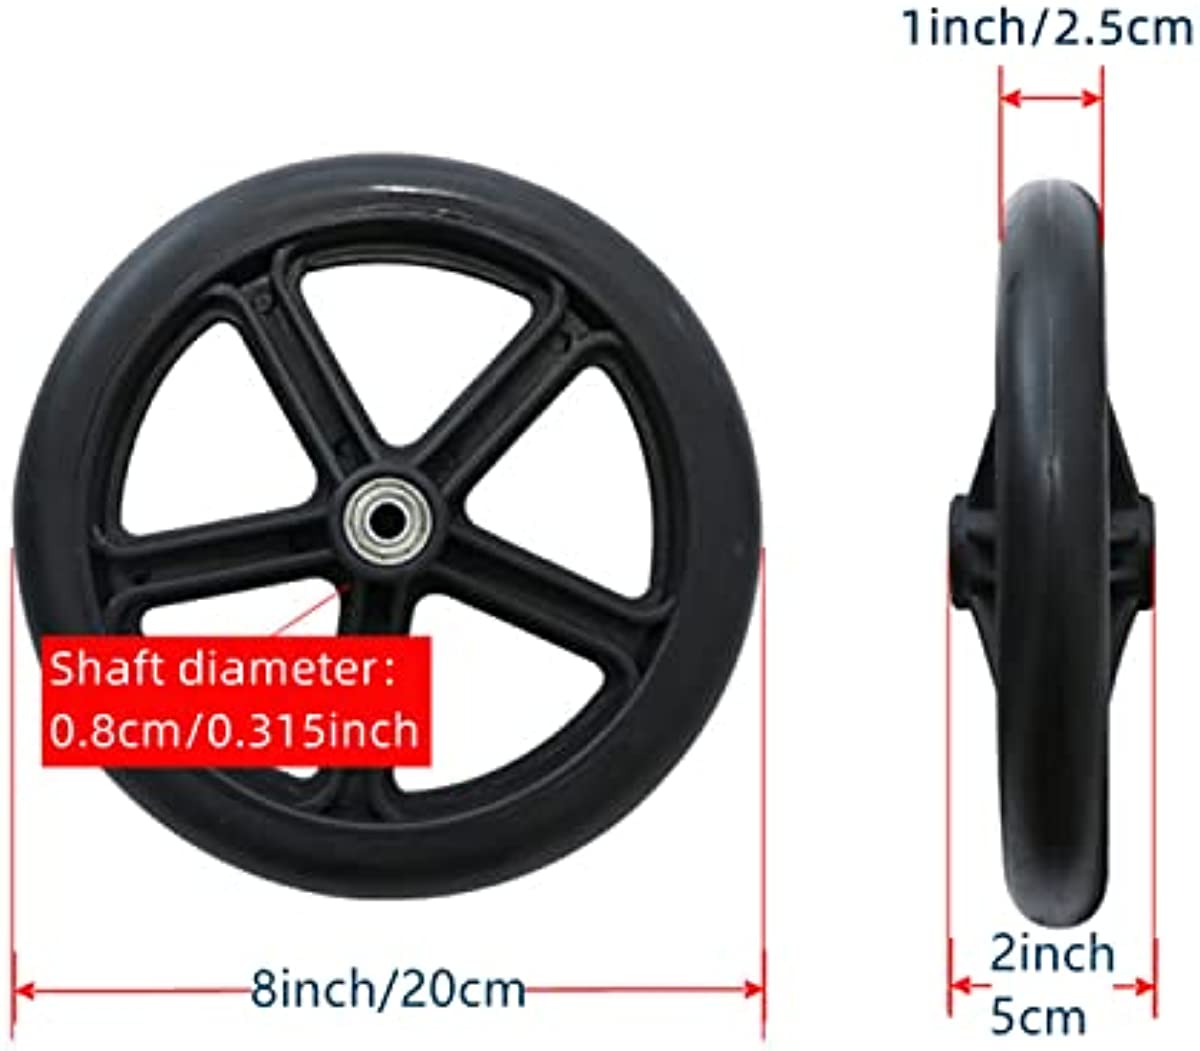 EMOT 8 Inch by 1 Inch, Wheel Replacement for Wheelchairs, Black (2)